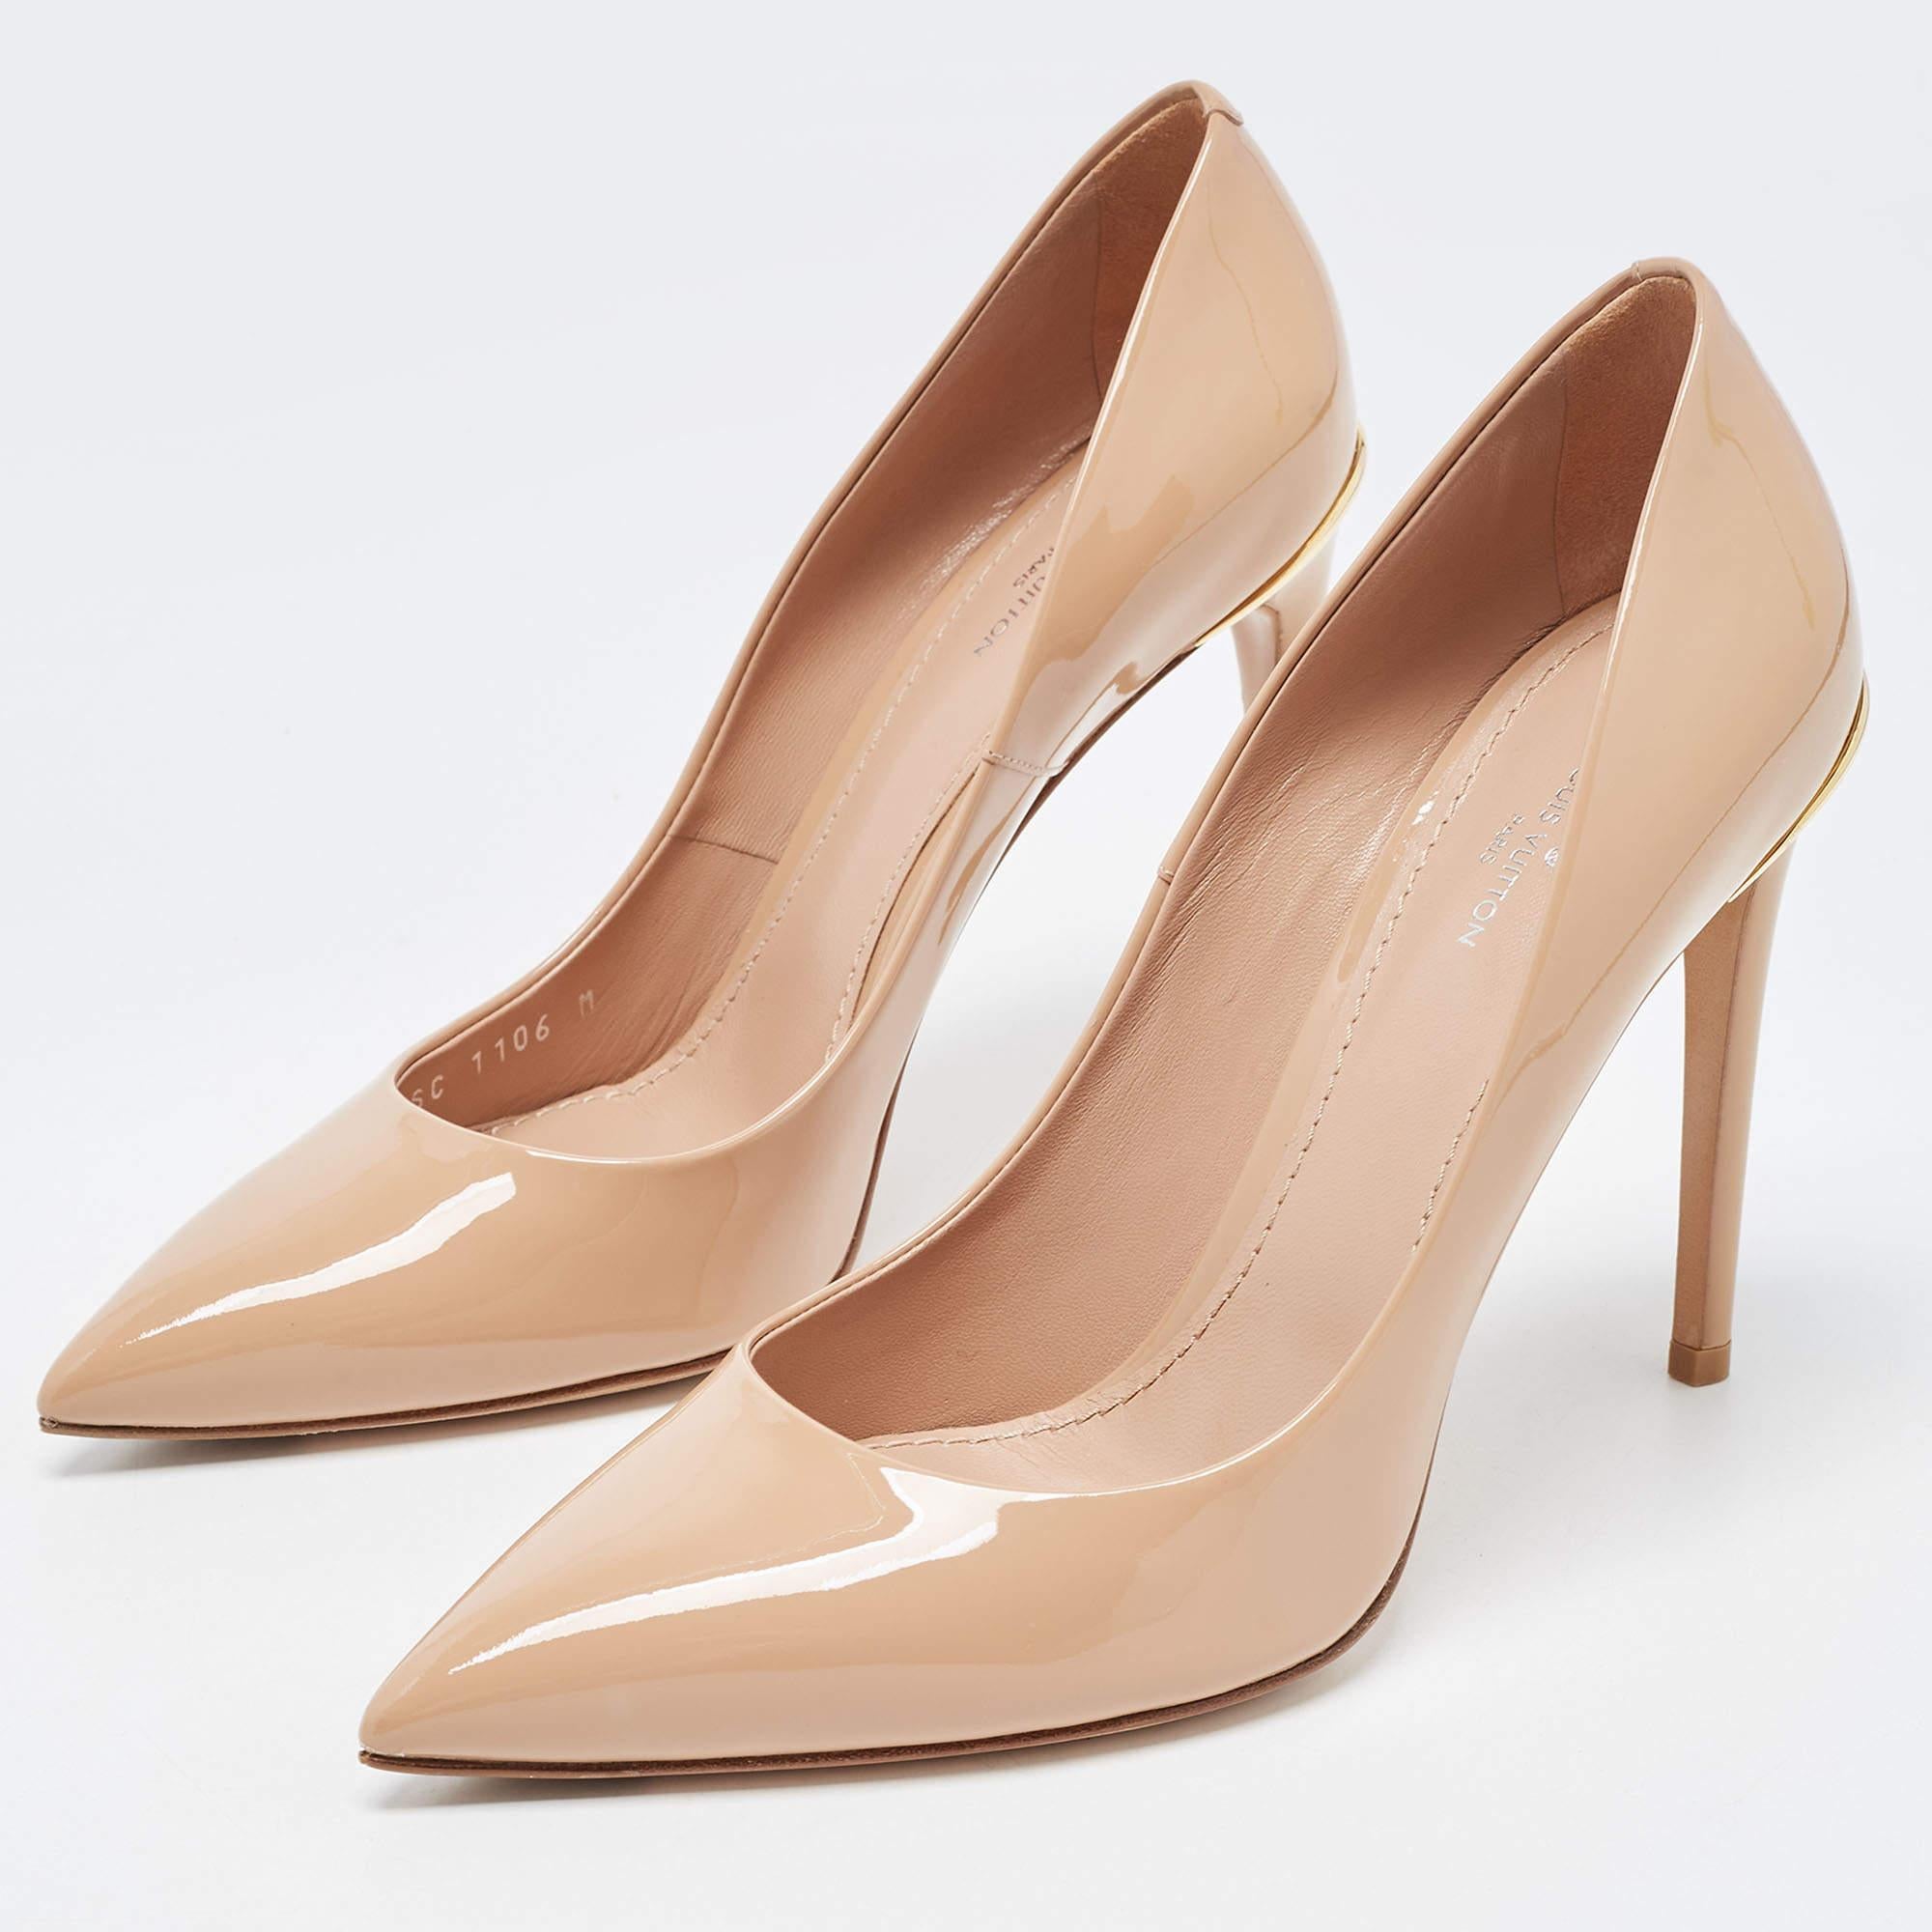 Louis Vuitton Beige Patent Leather Eyeline Pointed Toe Pumps Size 38.5 2